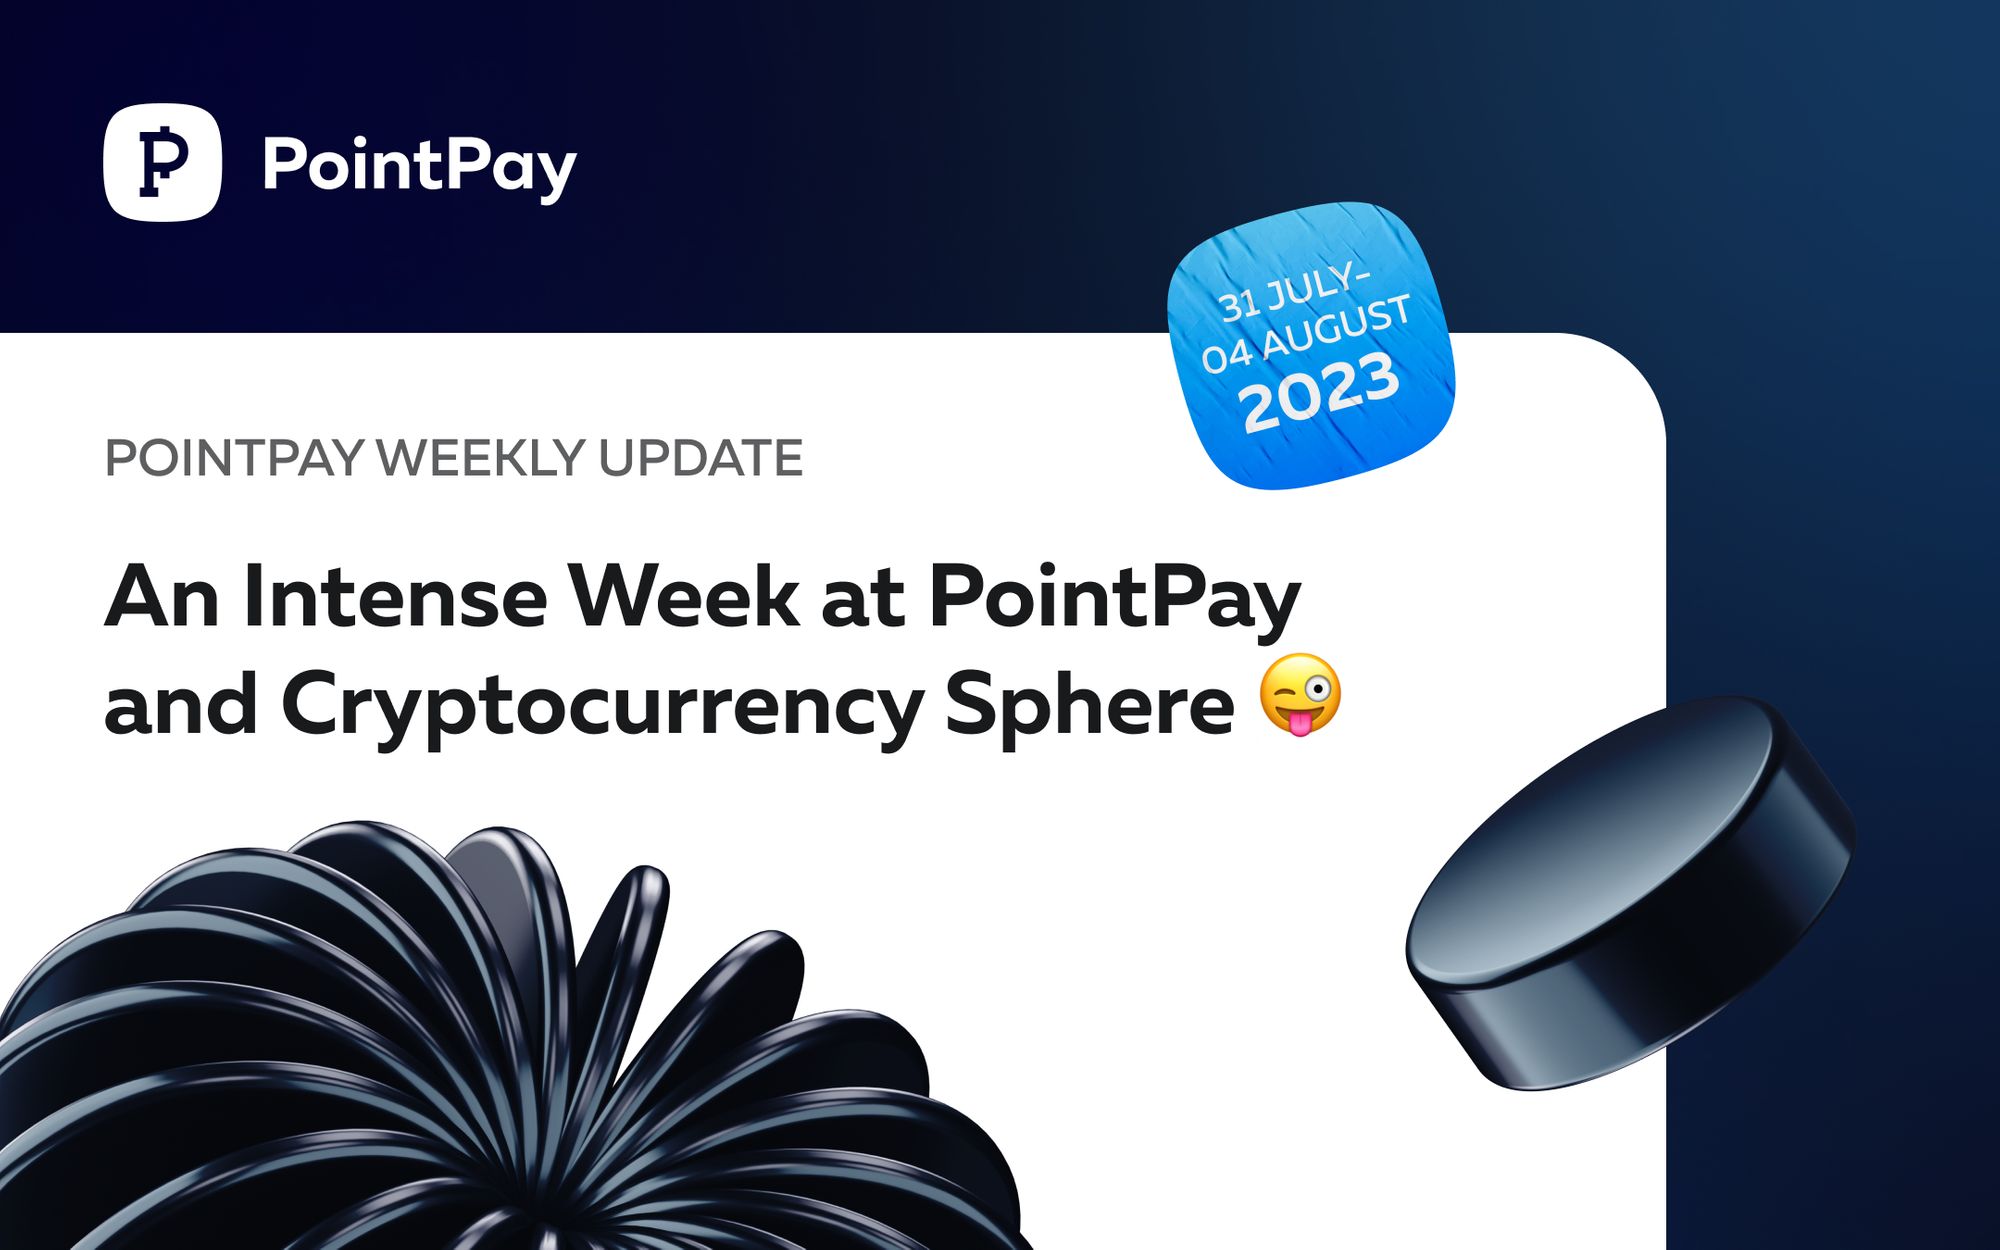 PointPay Weekly Update (31 July - 4 August 2023)